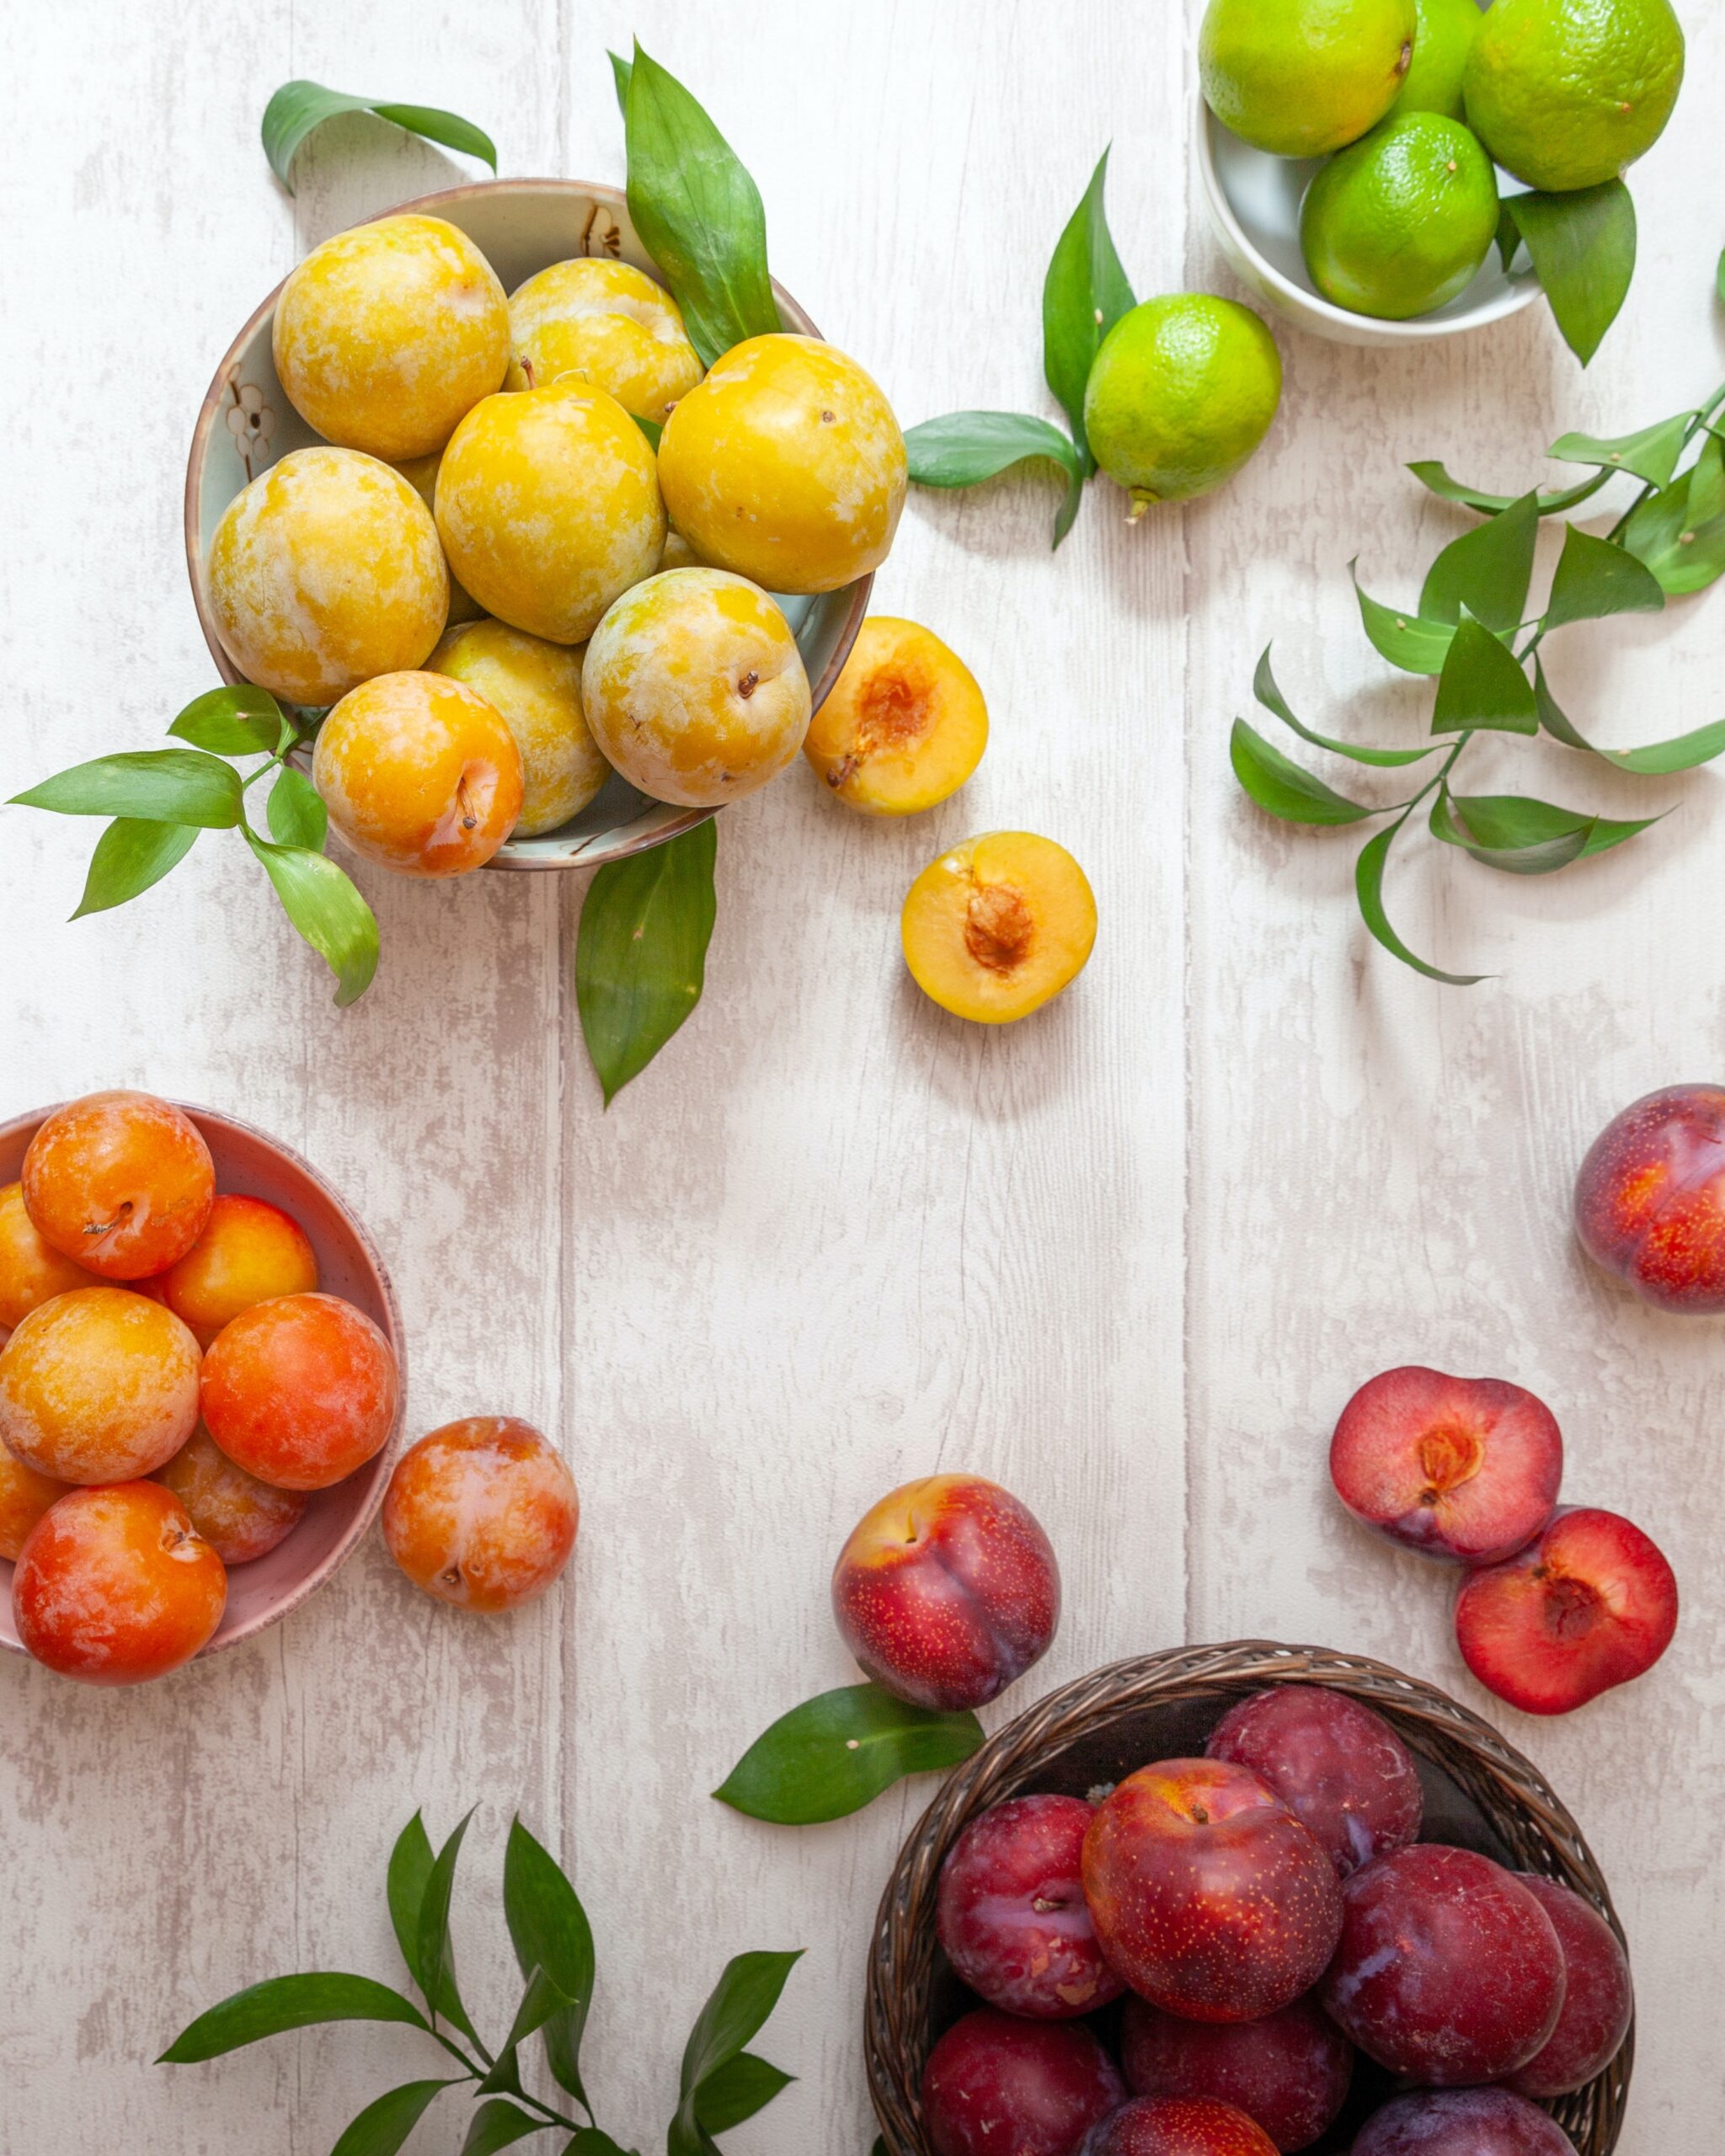 Market Fresh Finds: Tasty plums in season, low in calories - The